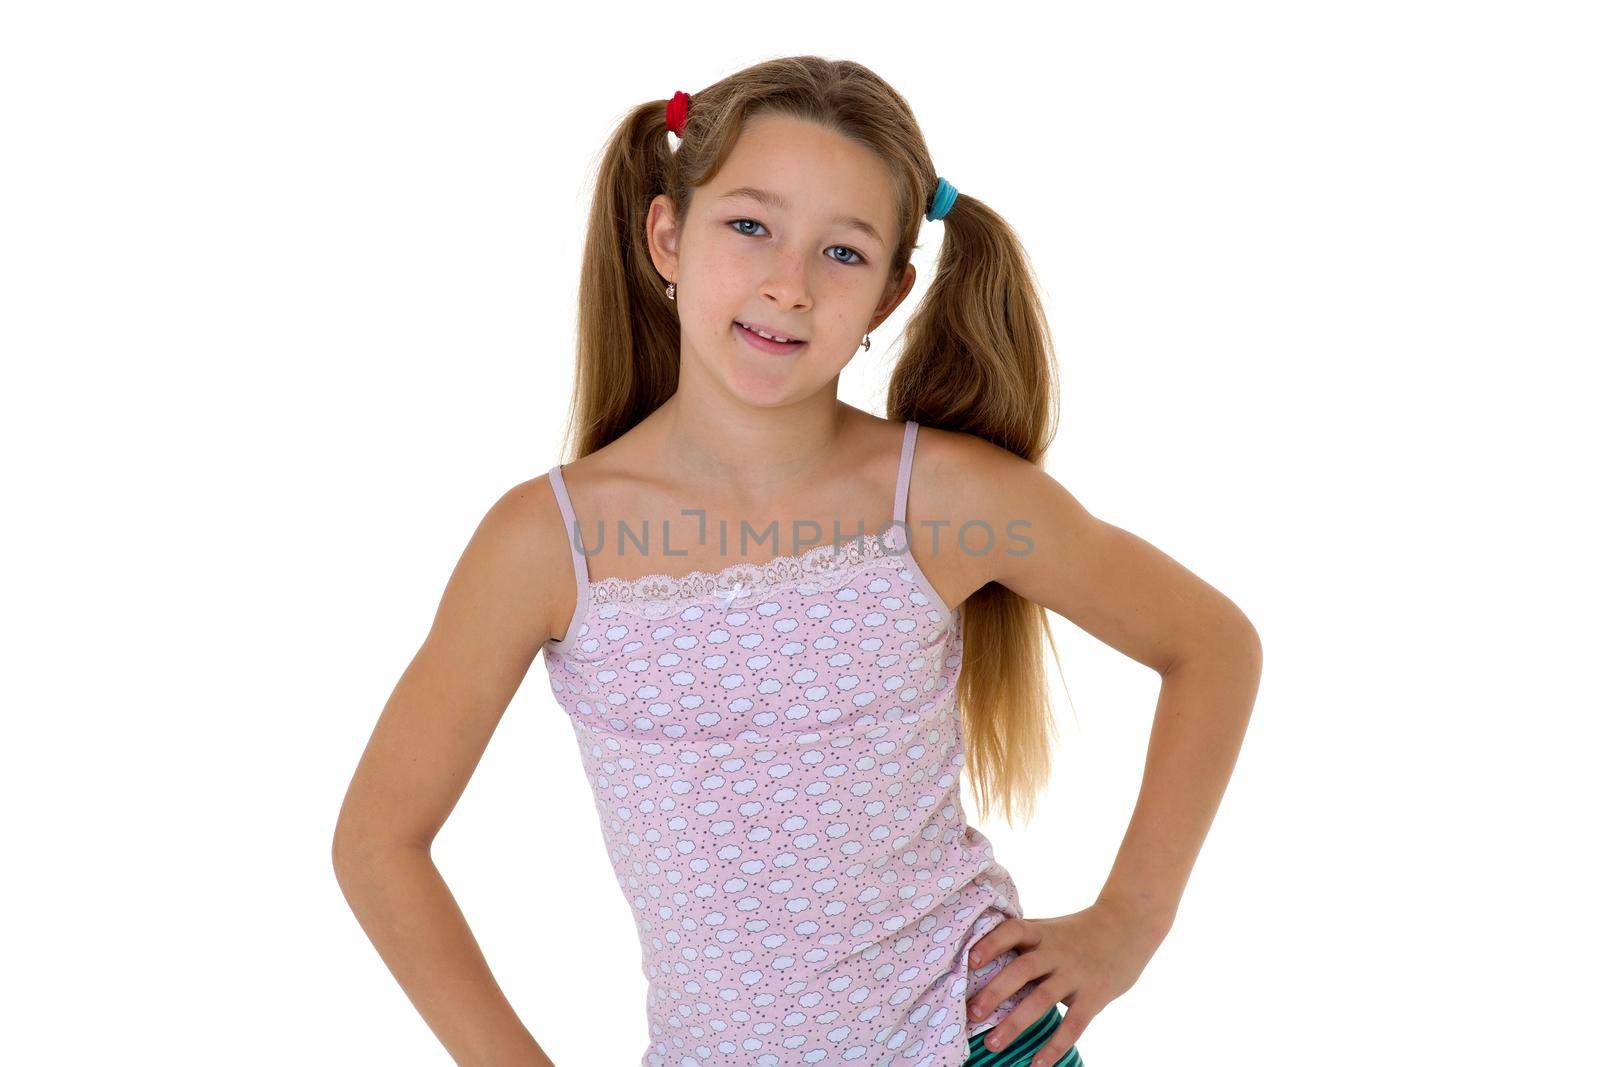 Cute smiling girl standing with hands on her waist. Portrait of preteen child posing in studio against white background.